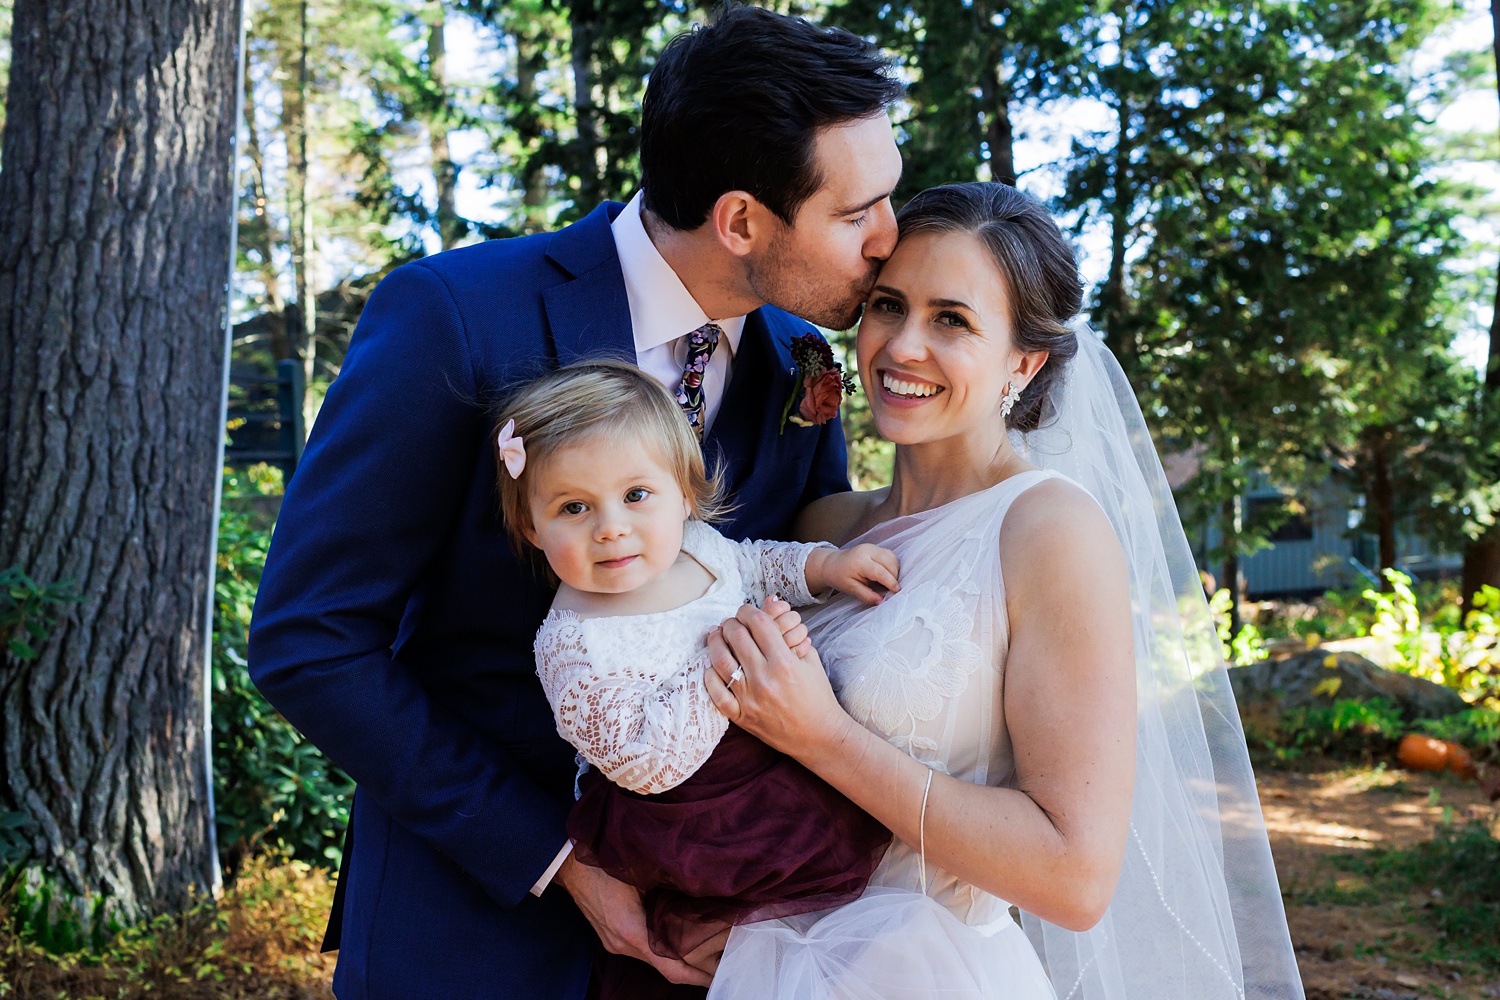 The couple and their young daughter share a moment together on the wedding day in Maine